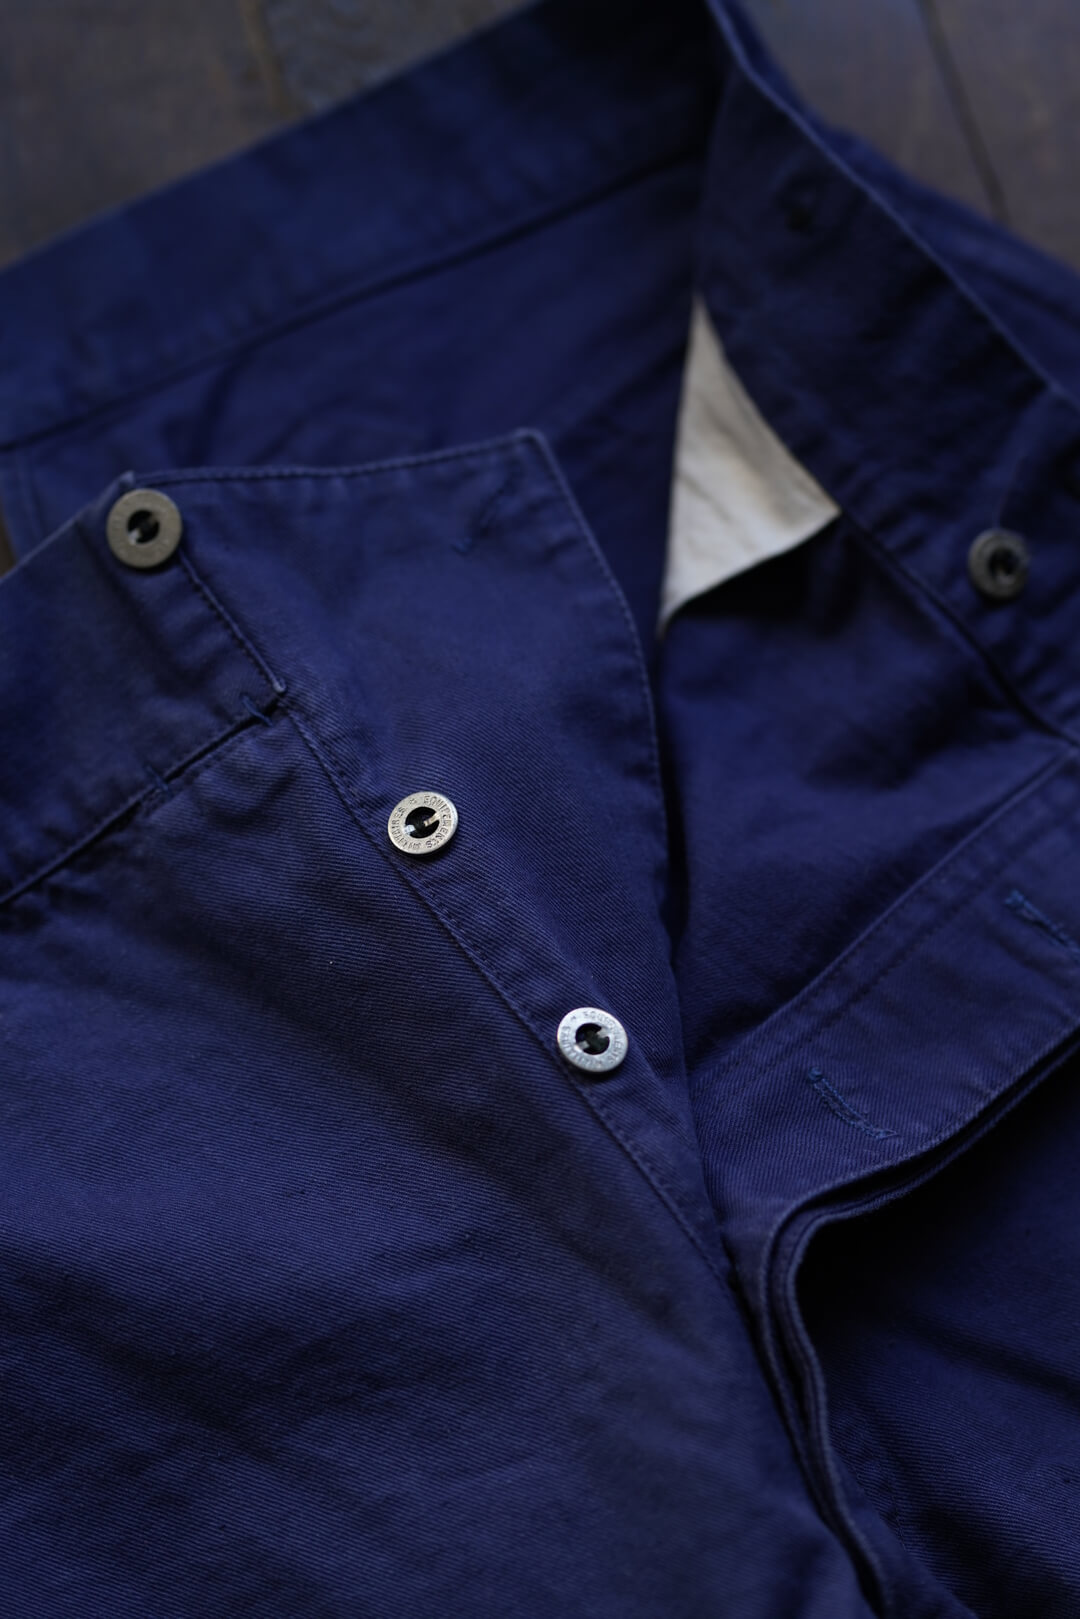 1940's Marine Nationale Work Trousers